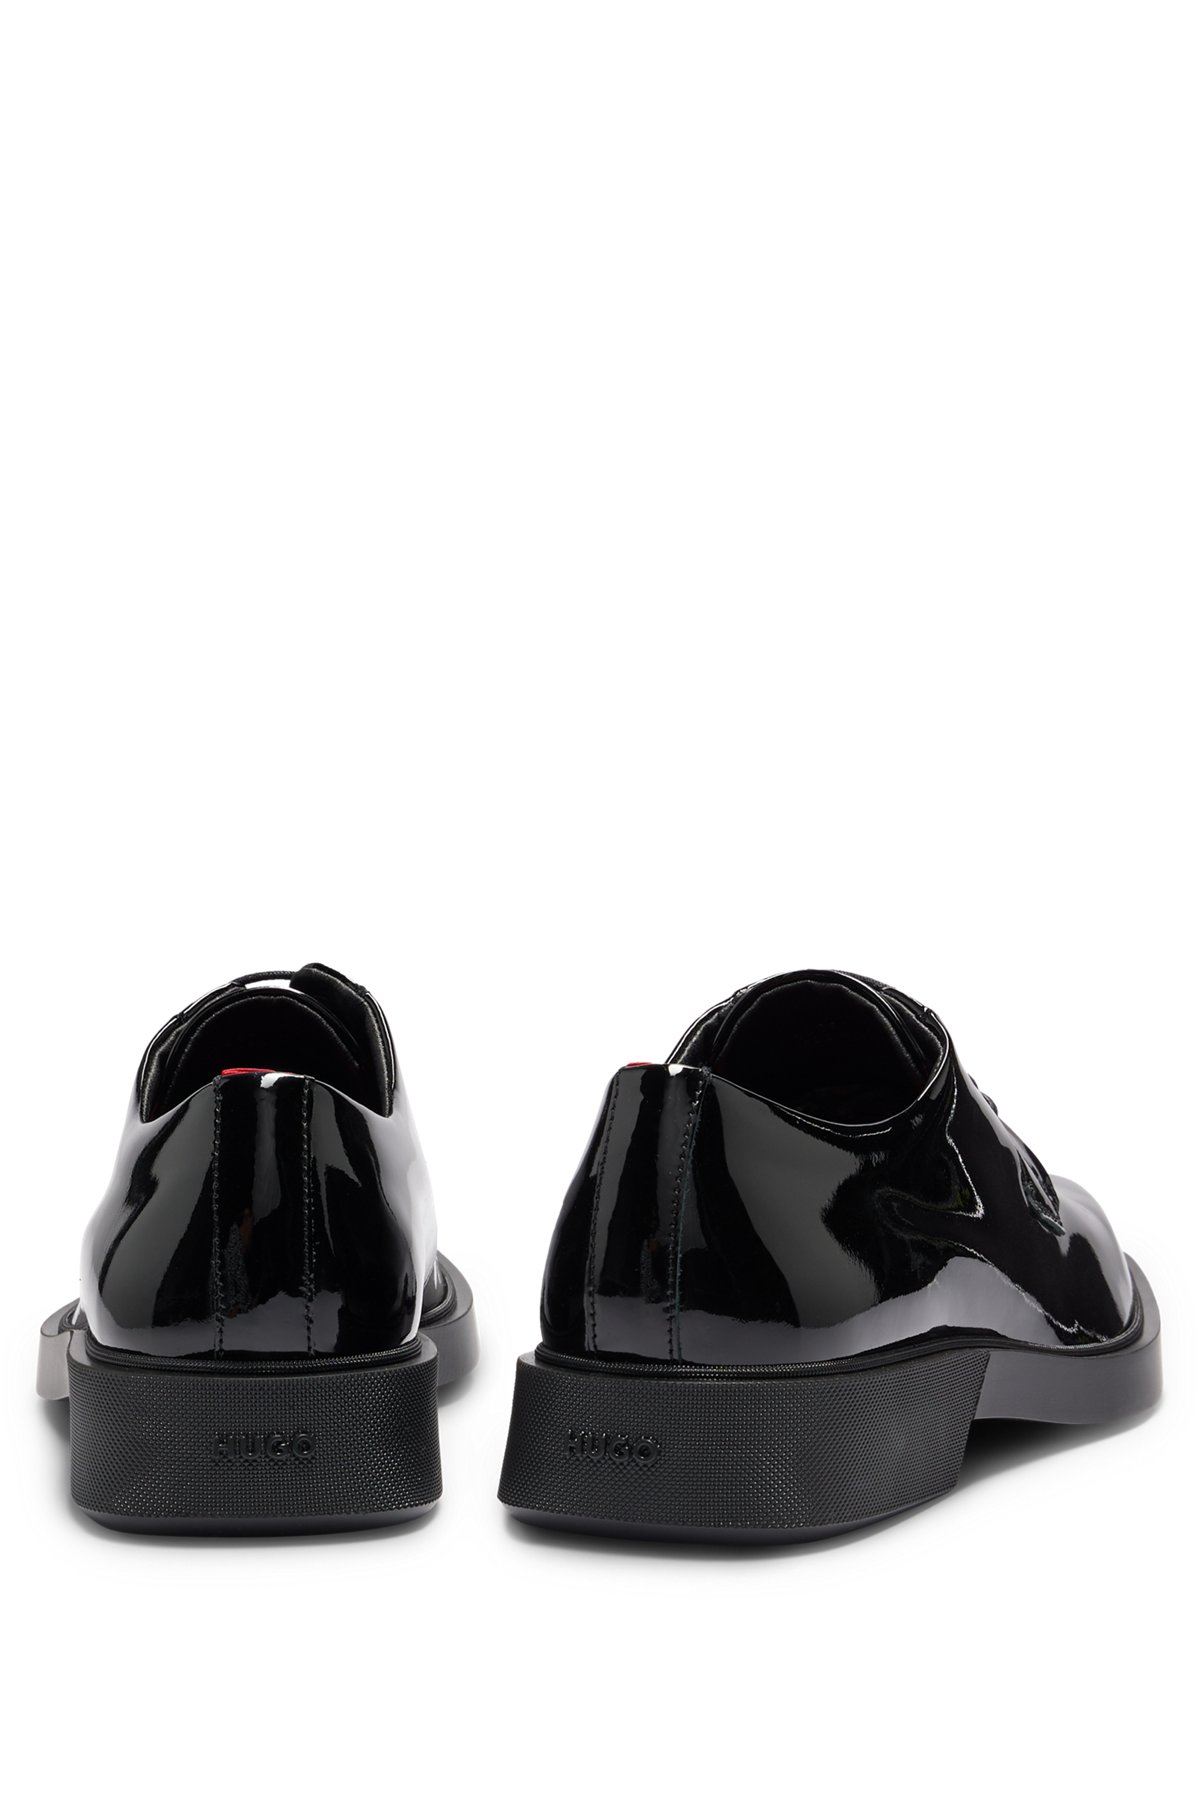 HUGO - Patent-leather Derby shoes with signature pull loop